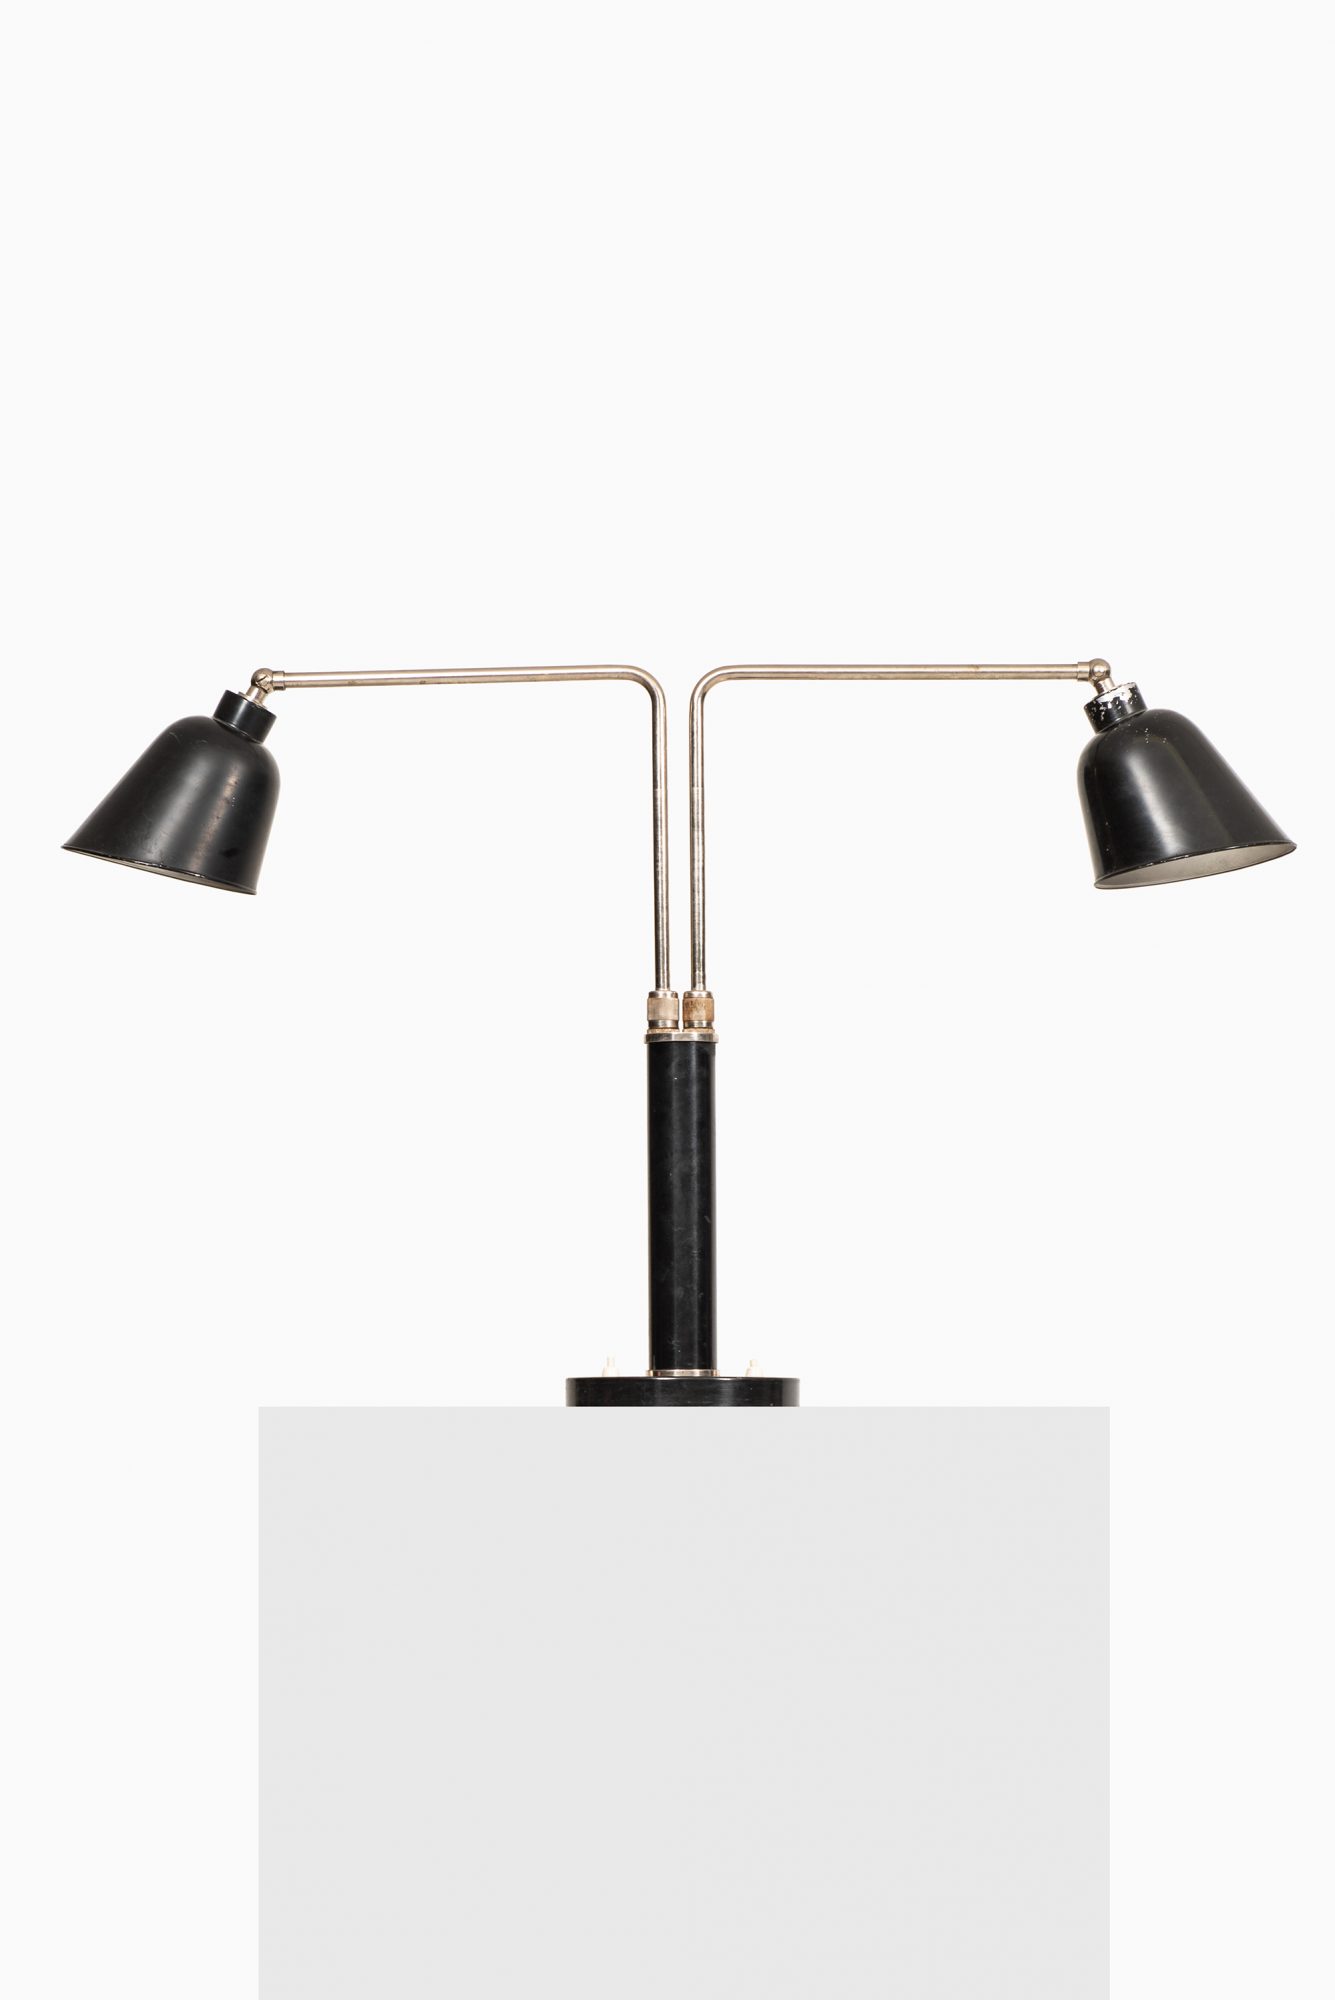 Christian Dell table lamp by Bünte & Remmler at Studio Schalling